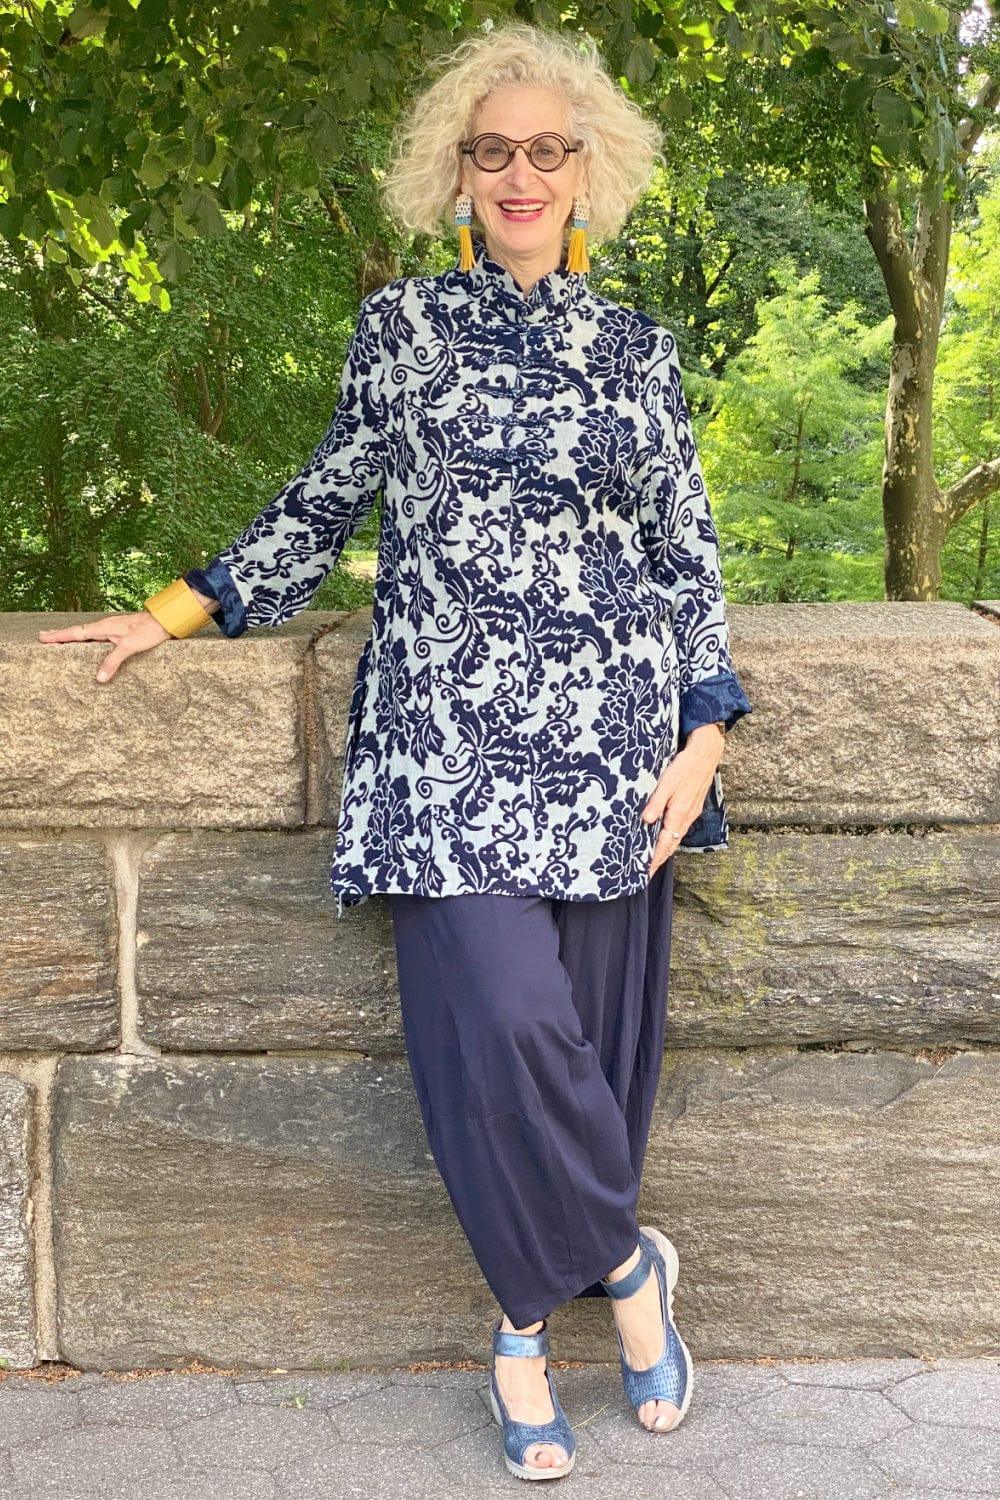 Double cotton gauze indigo print tunic being worn by an older smiling woman. She is wearing fun tassle earings and a chunky mustard colored bracelet.